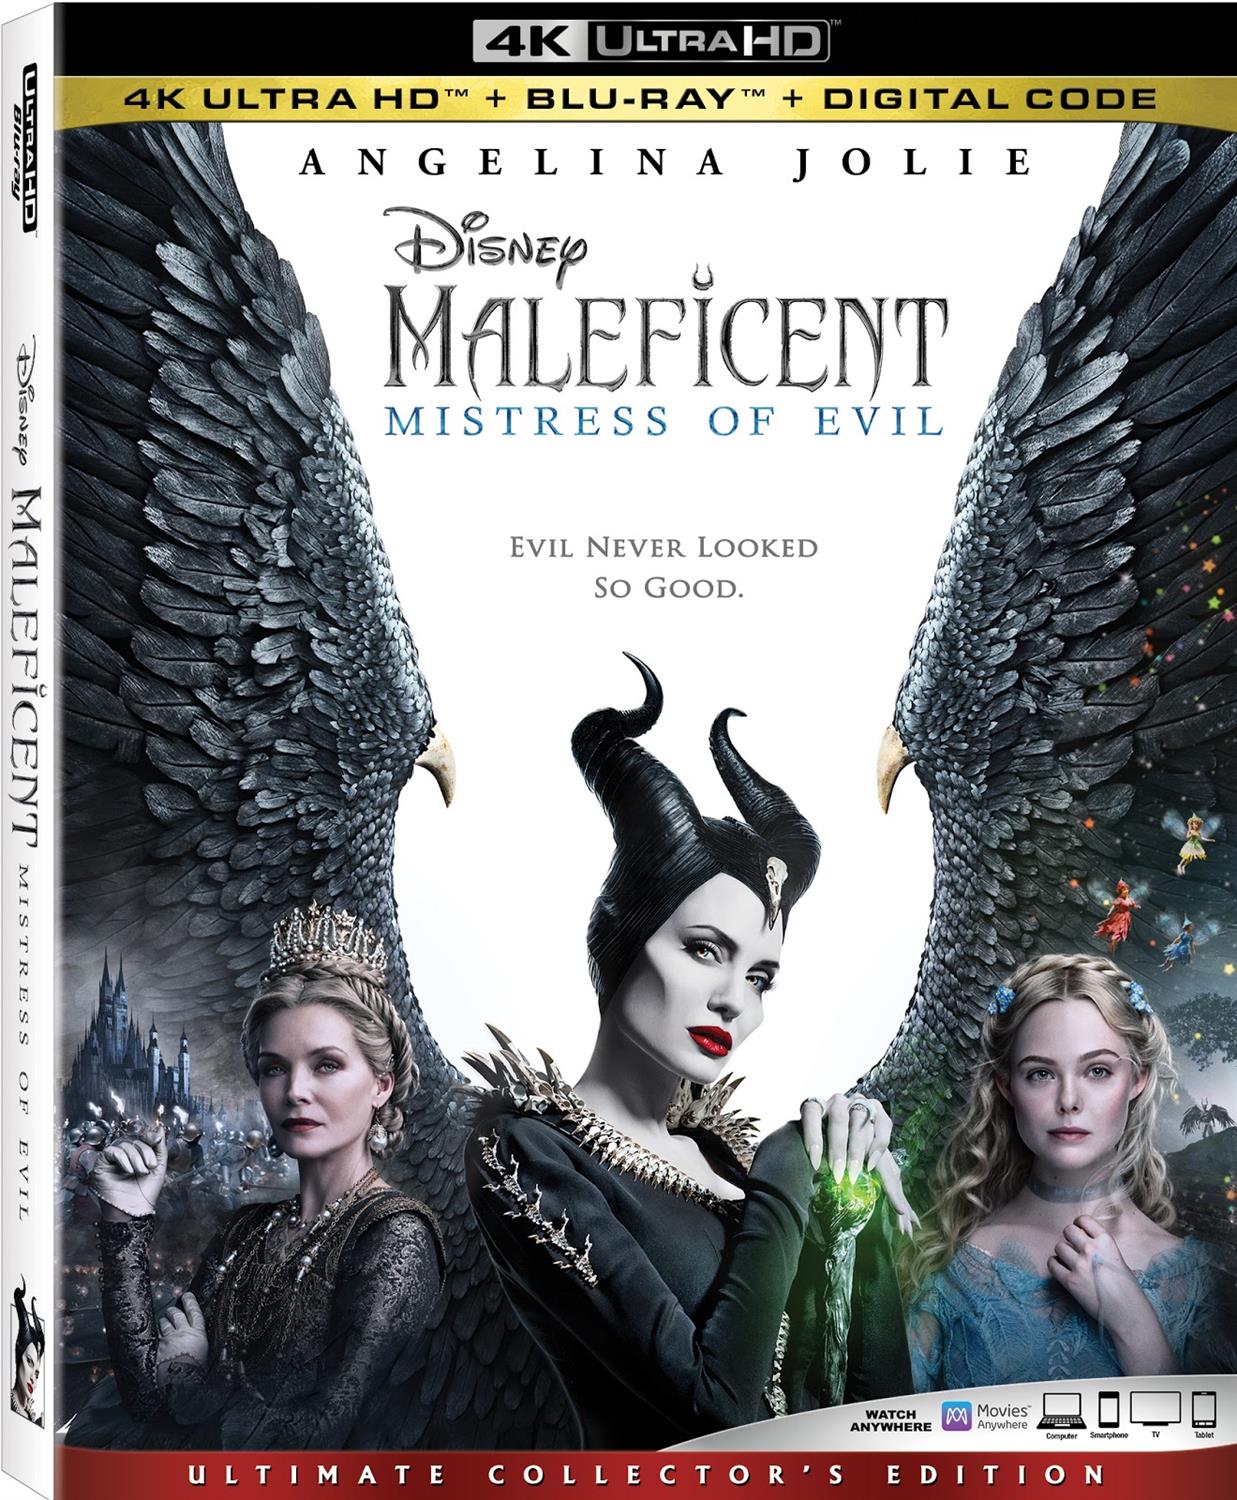 Maleficent: Mistress of Evil Comes to Home Release This Winter